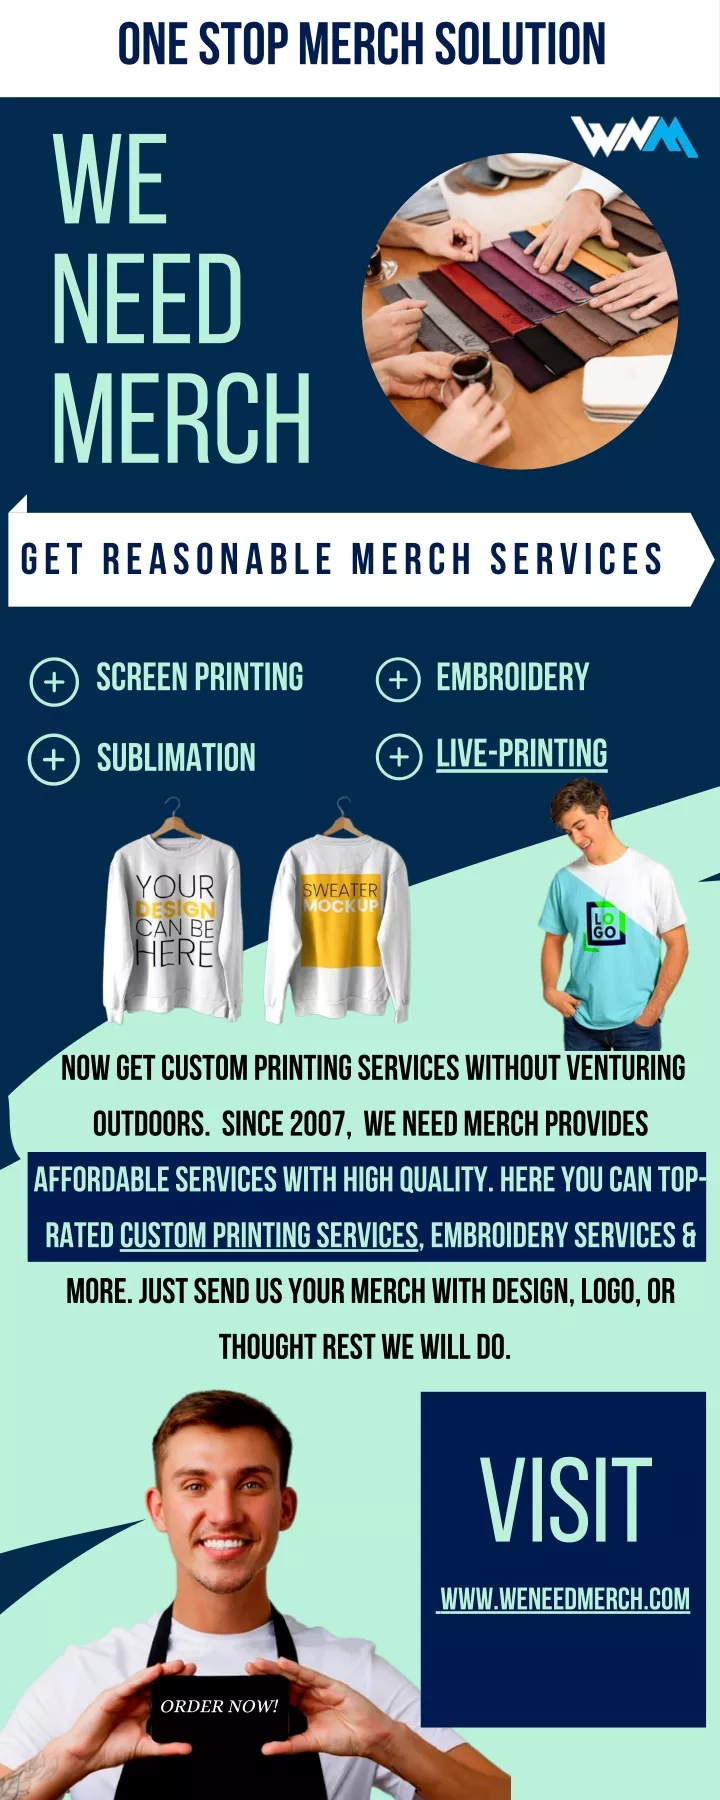 one stop merch solution